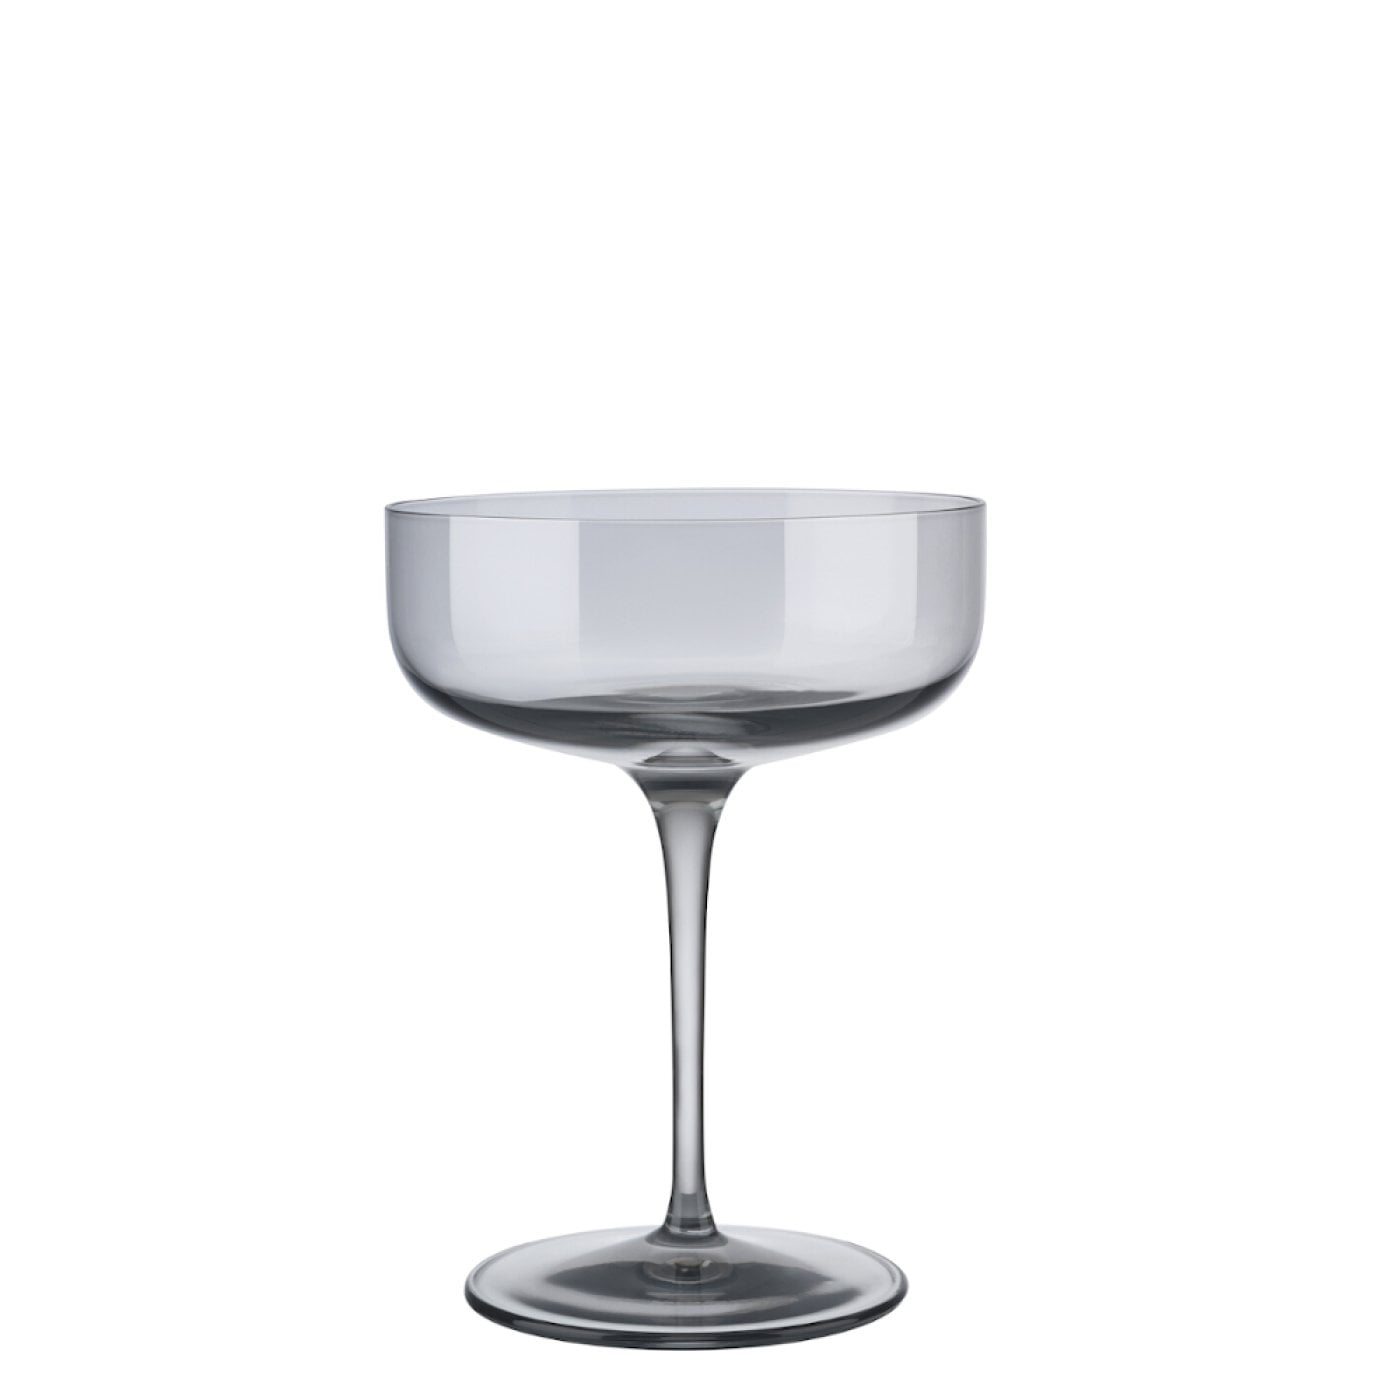 Blomus Champagne Coupe Glasses Tinted in Smoky-Grey Fuum Set of 4